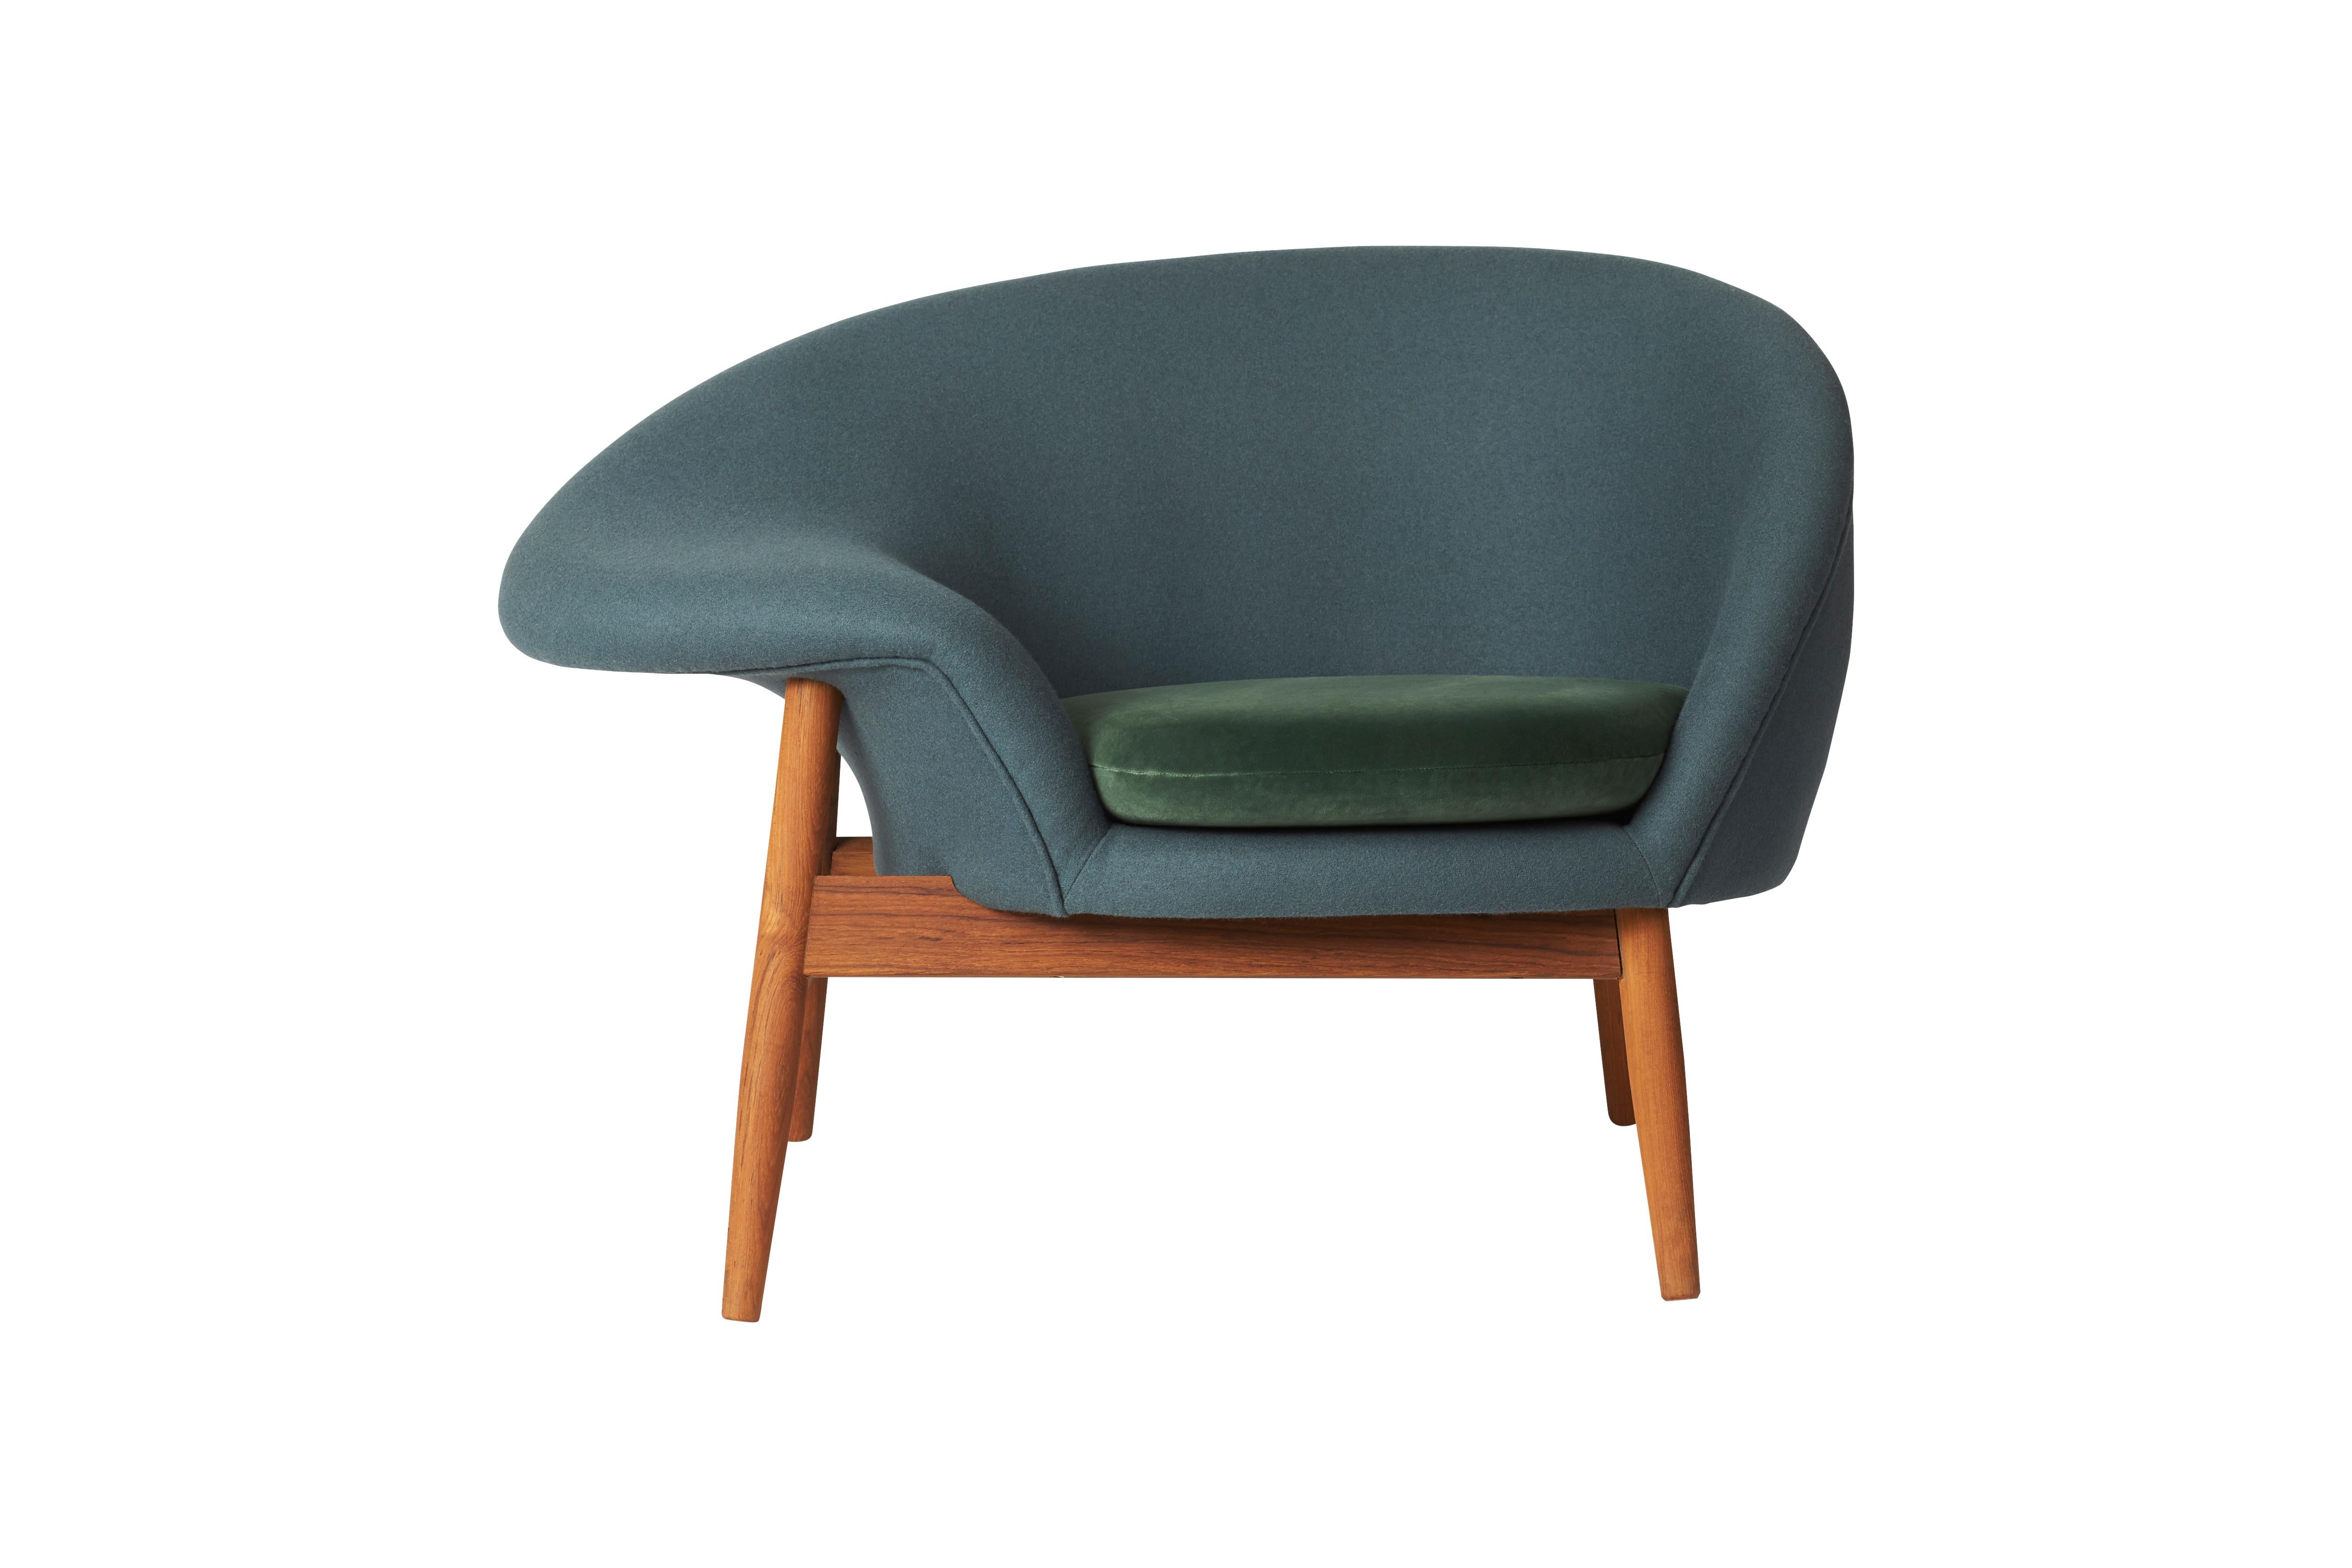 For Sale: Blue (Hero 991, Ritz 6381) Fried Egg Two-Tone Chair, by Hans Olsen from Warm Nordic